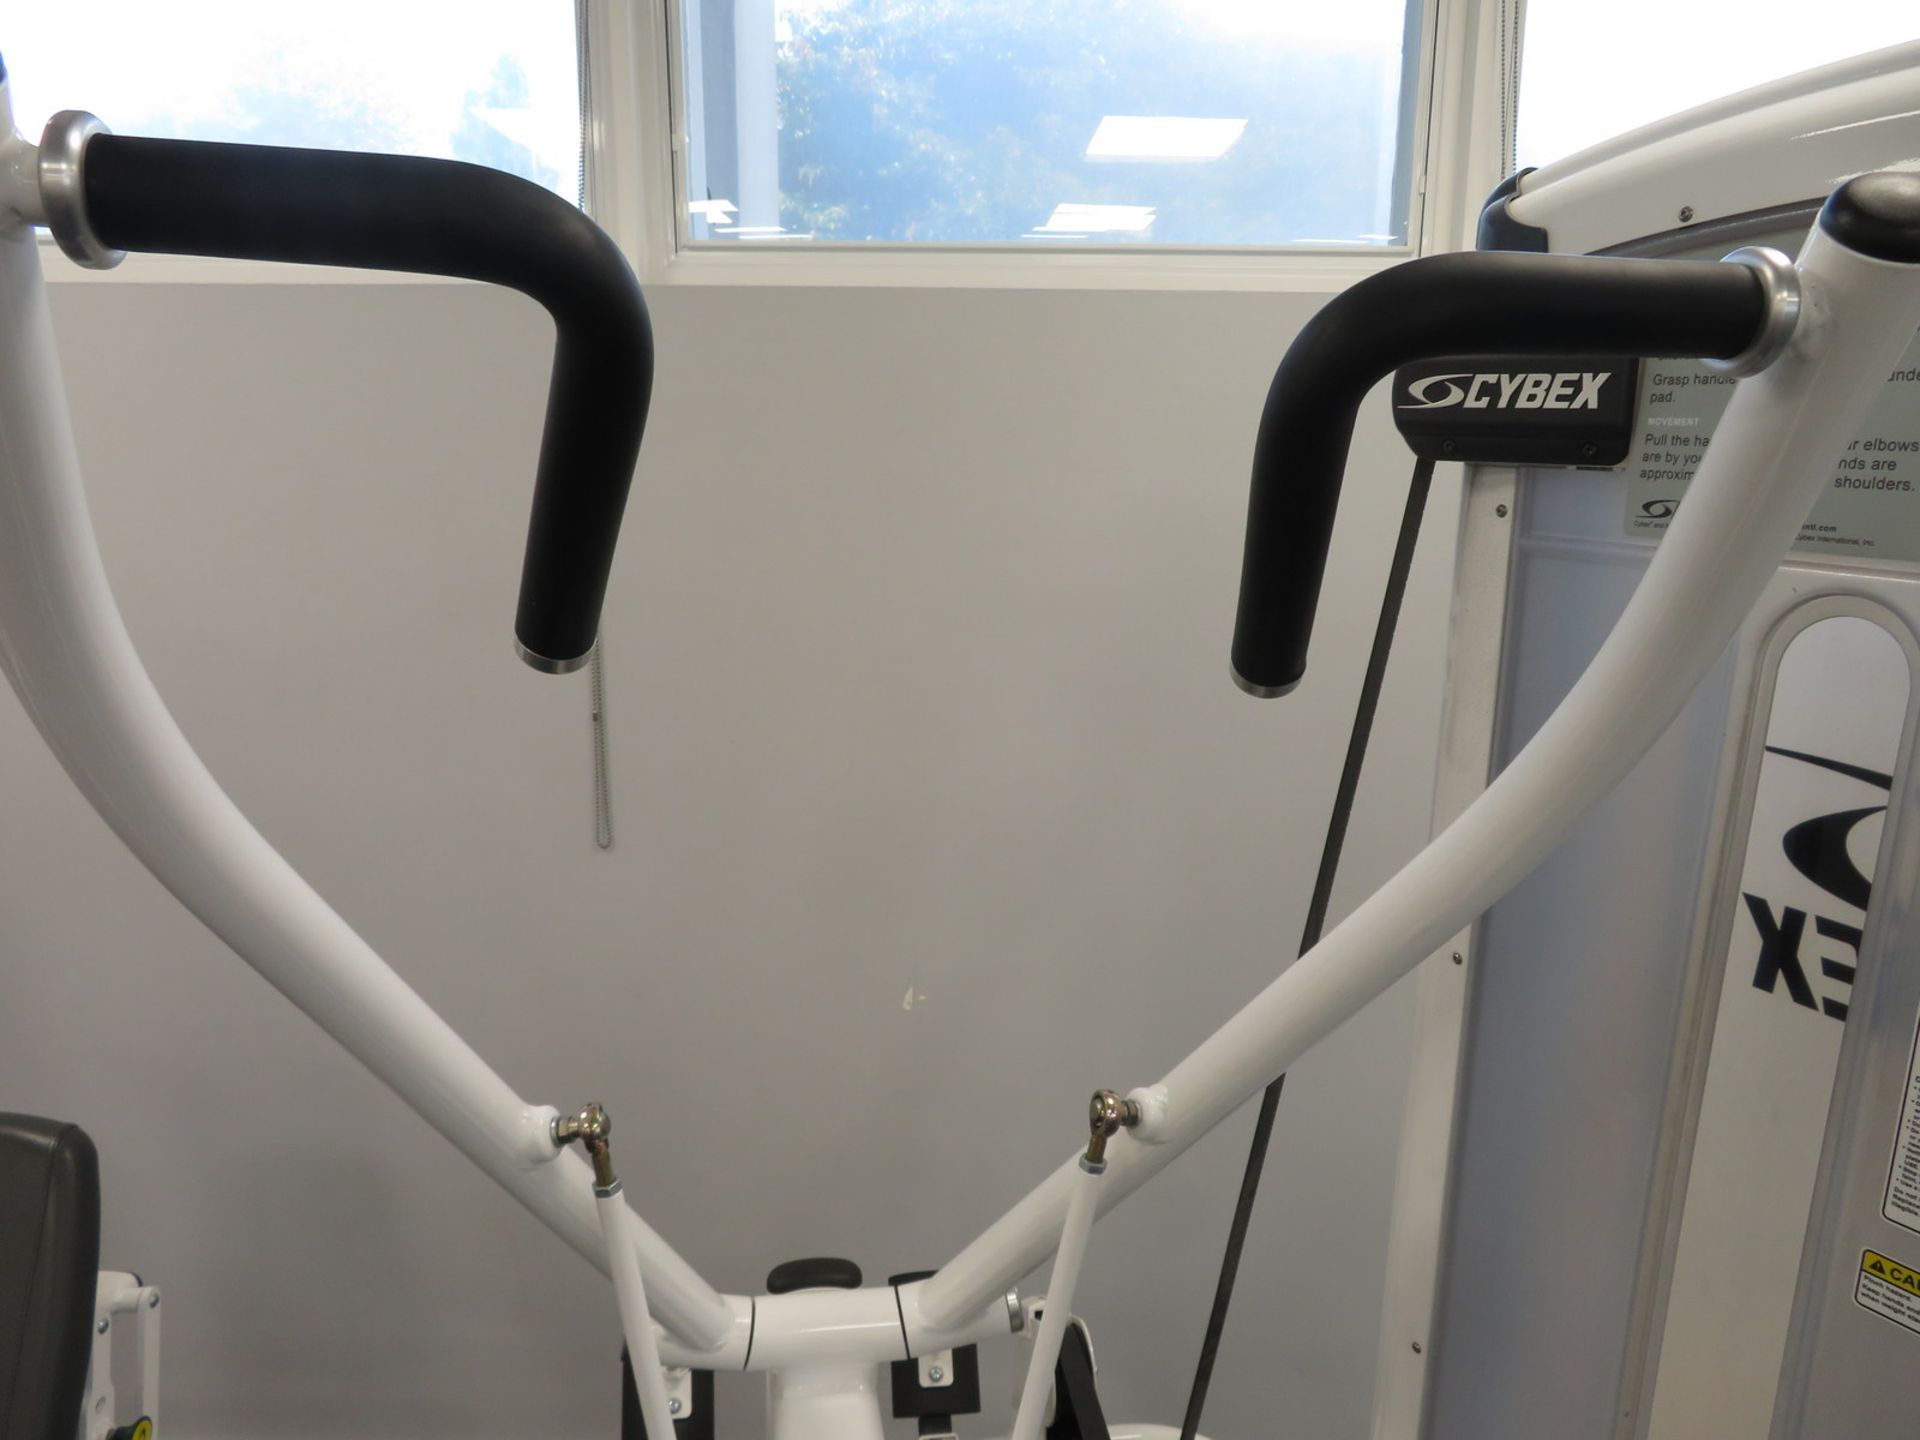 Cybex Pulldown Model: 12020. 103.5kg Weight Stack. Dimensions: 115x175x195cm (LxDxH) - Image 5 of 10